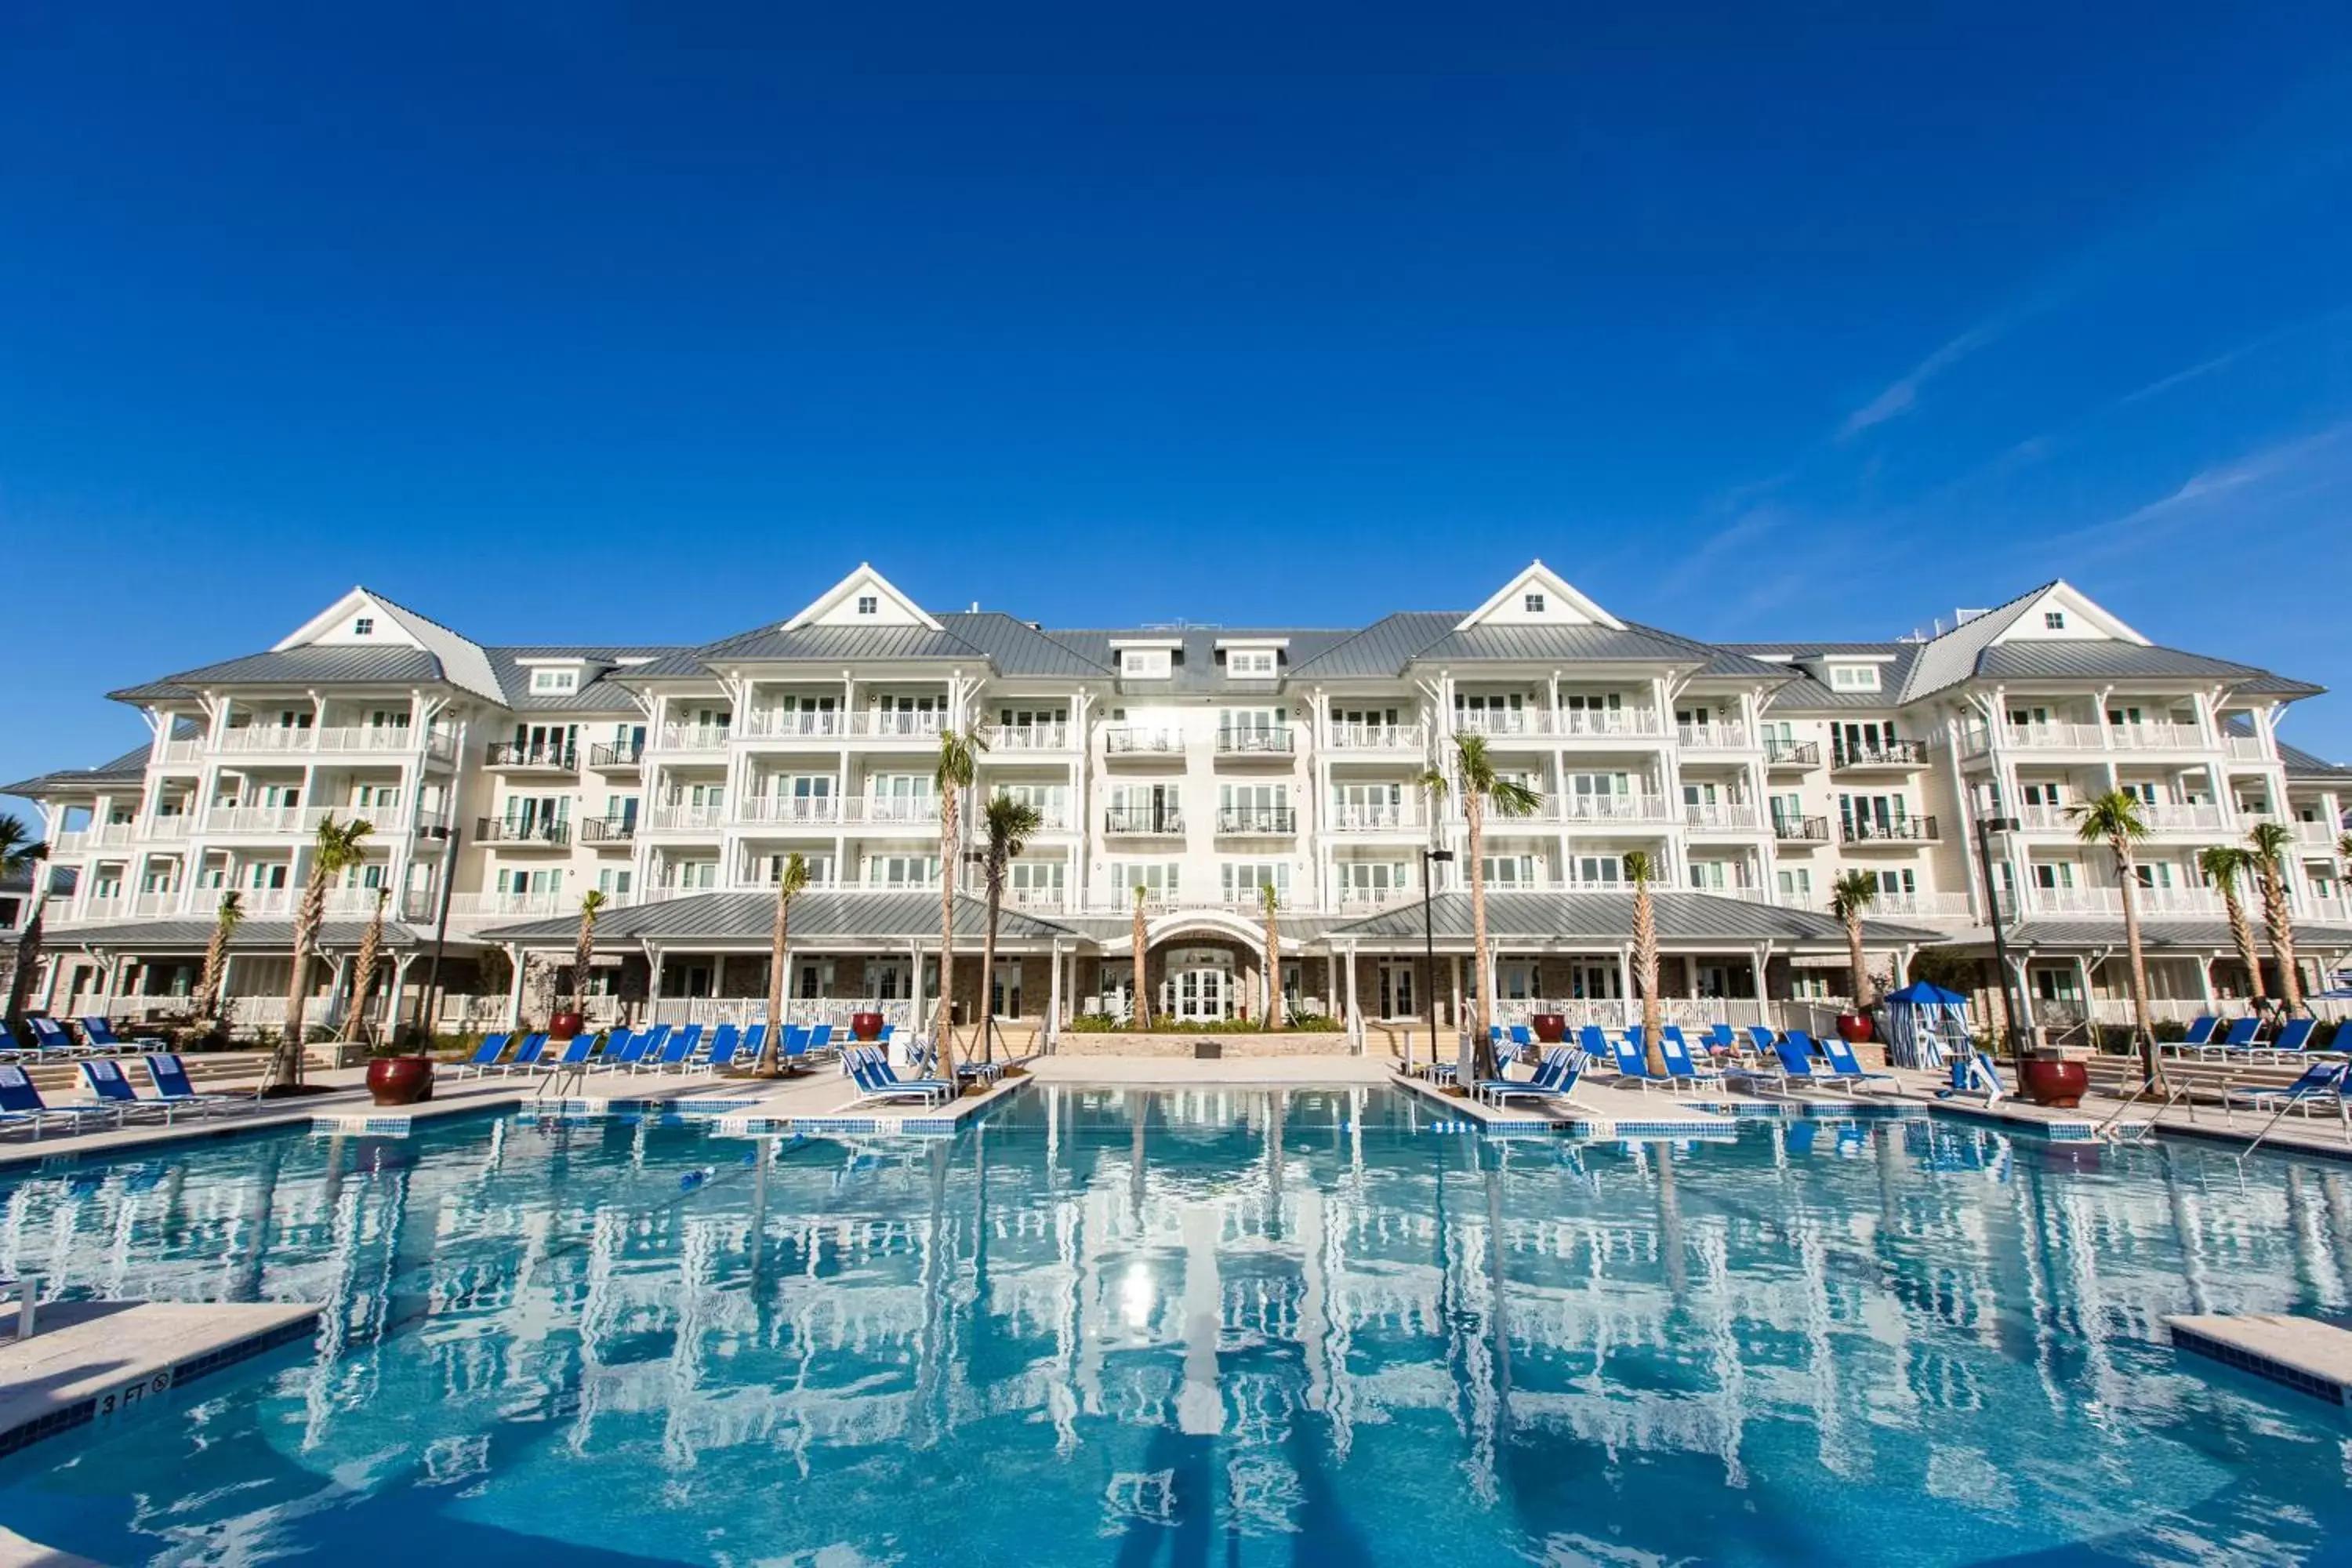 Property Building in The Beach Club at Charleston Harbor Resort and Marina